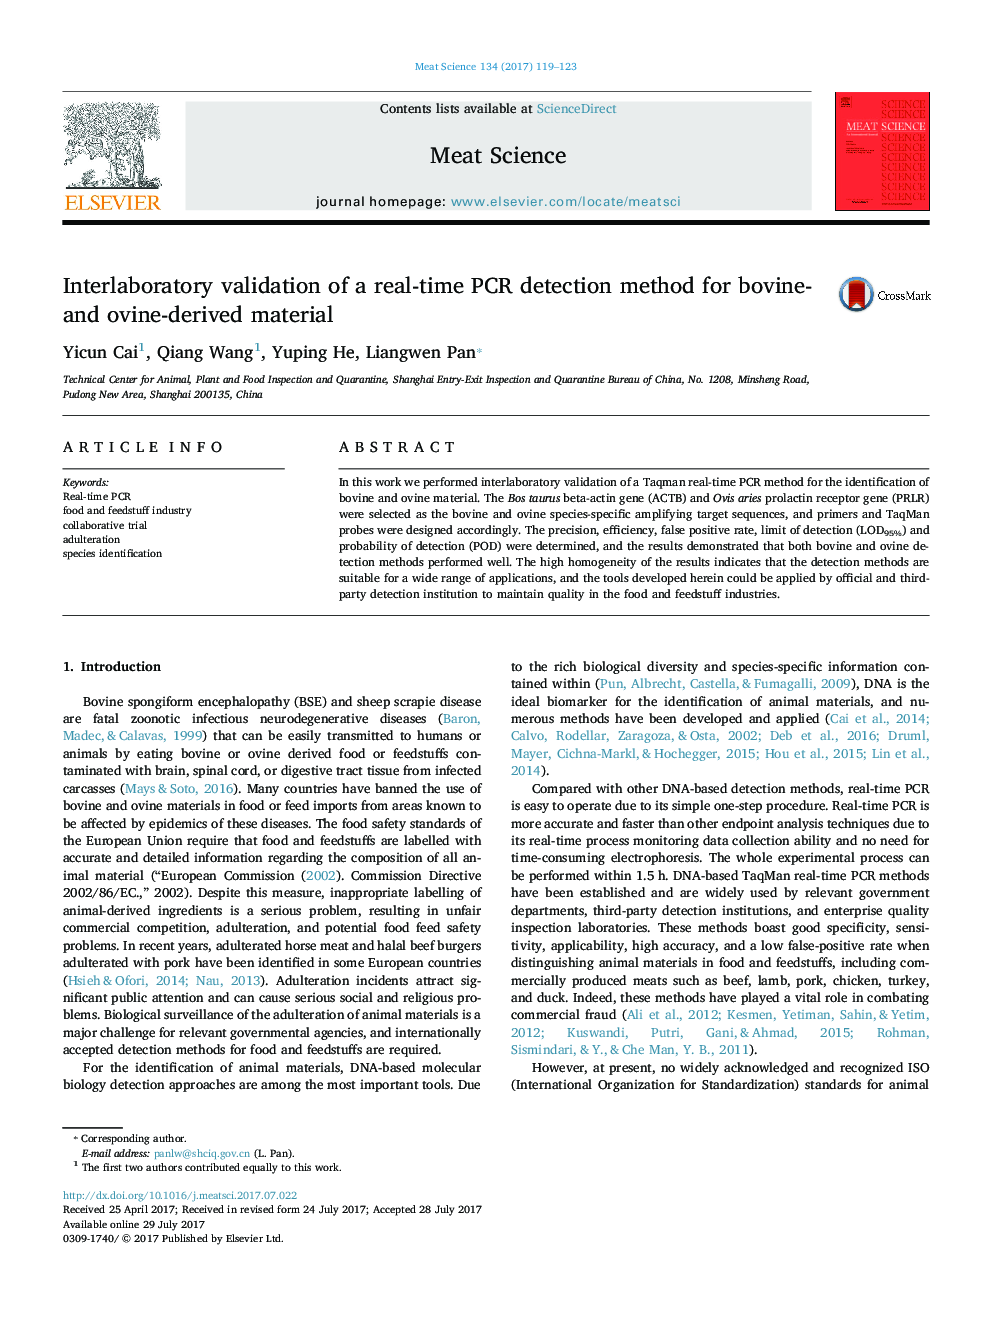 Interlaboratory validation of a real-time PCR detection method for bovine- and ovine-derived material